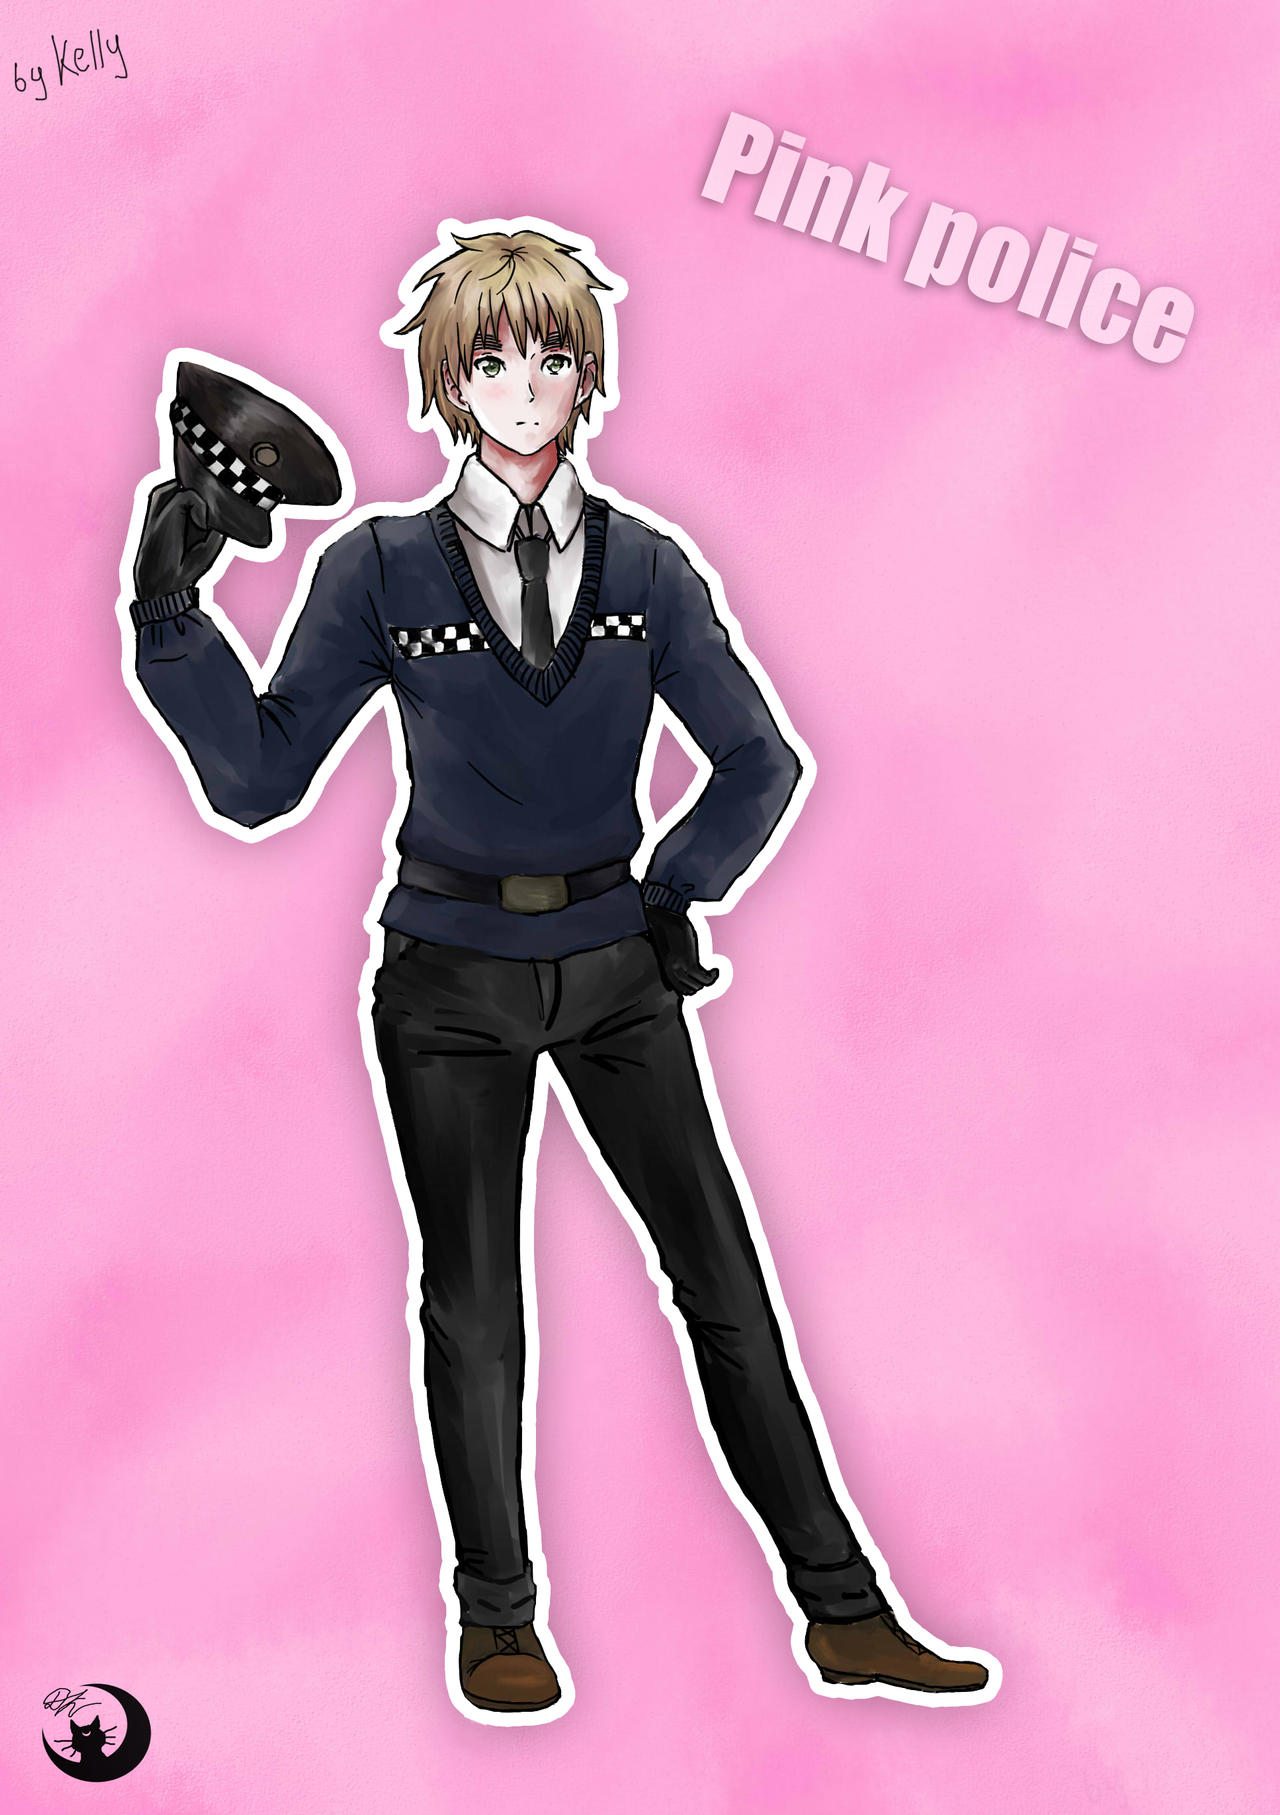 Pink police